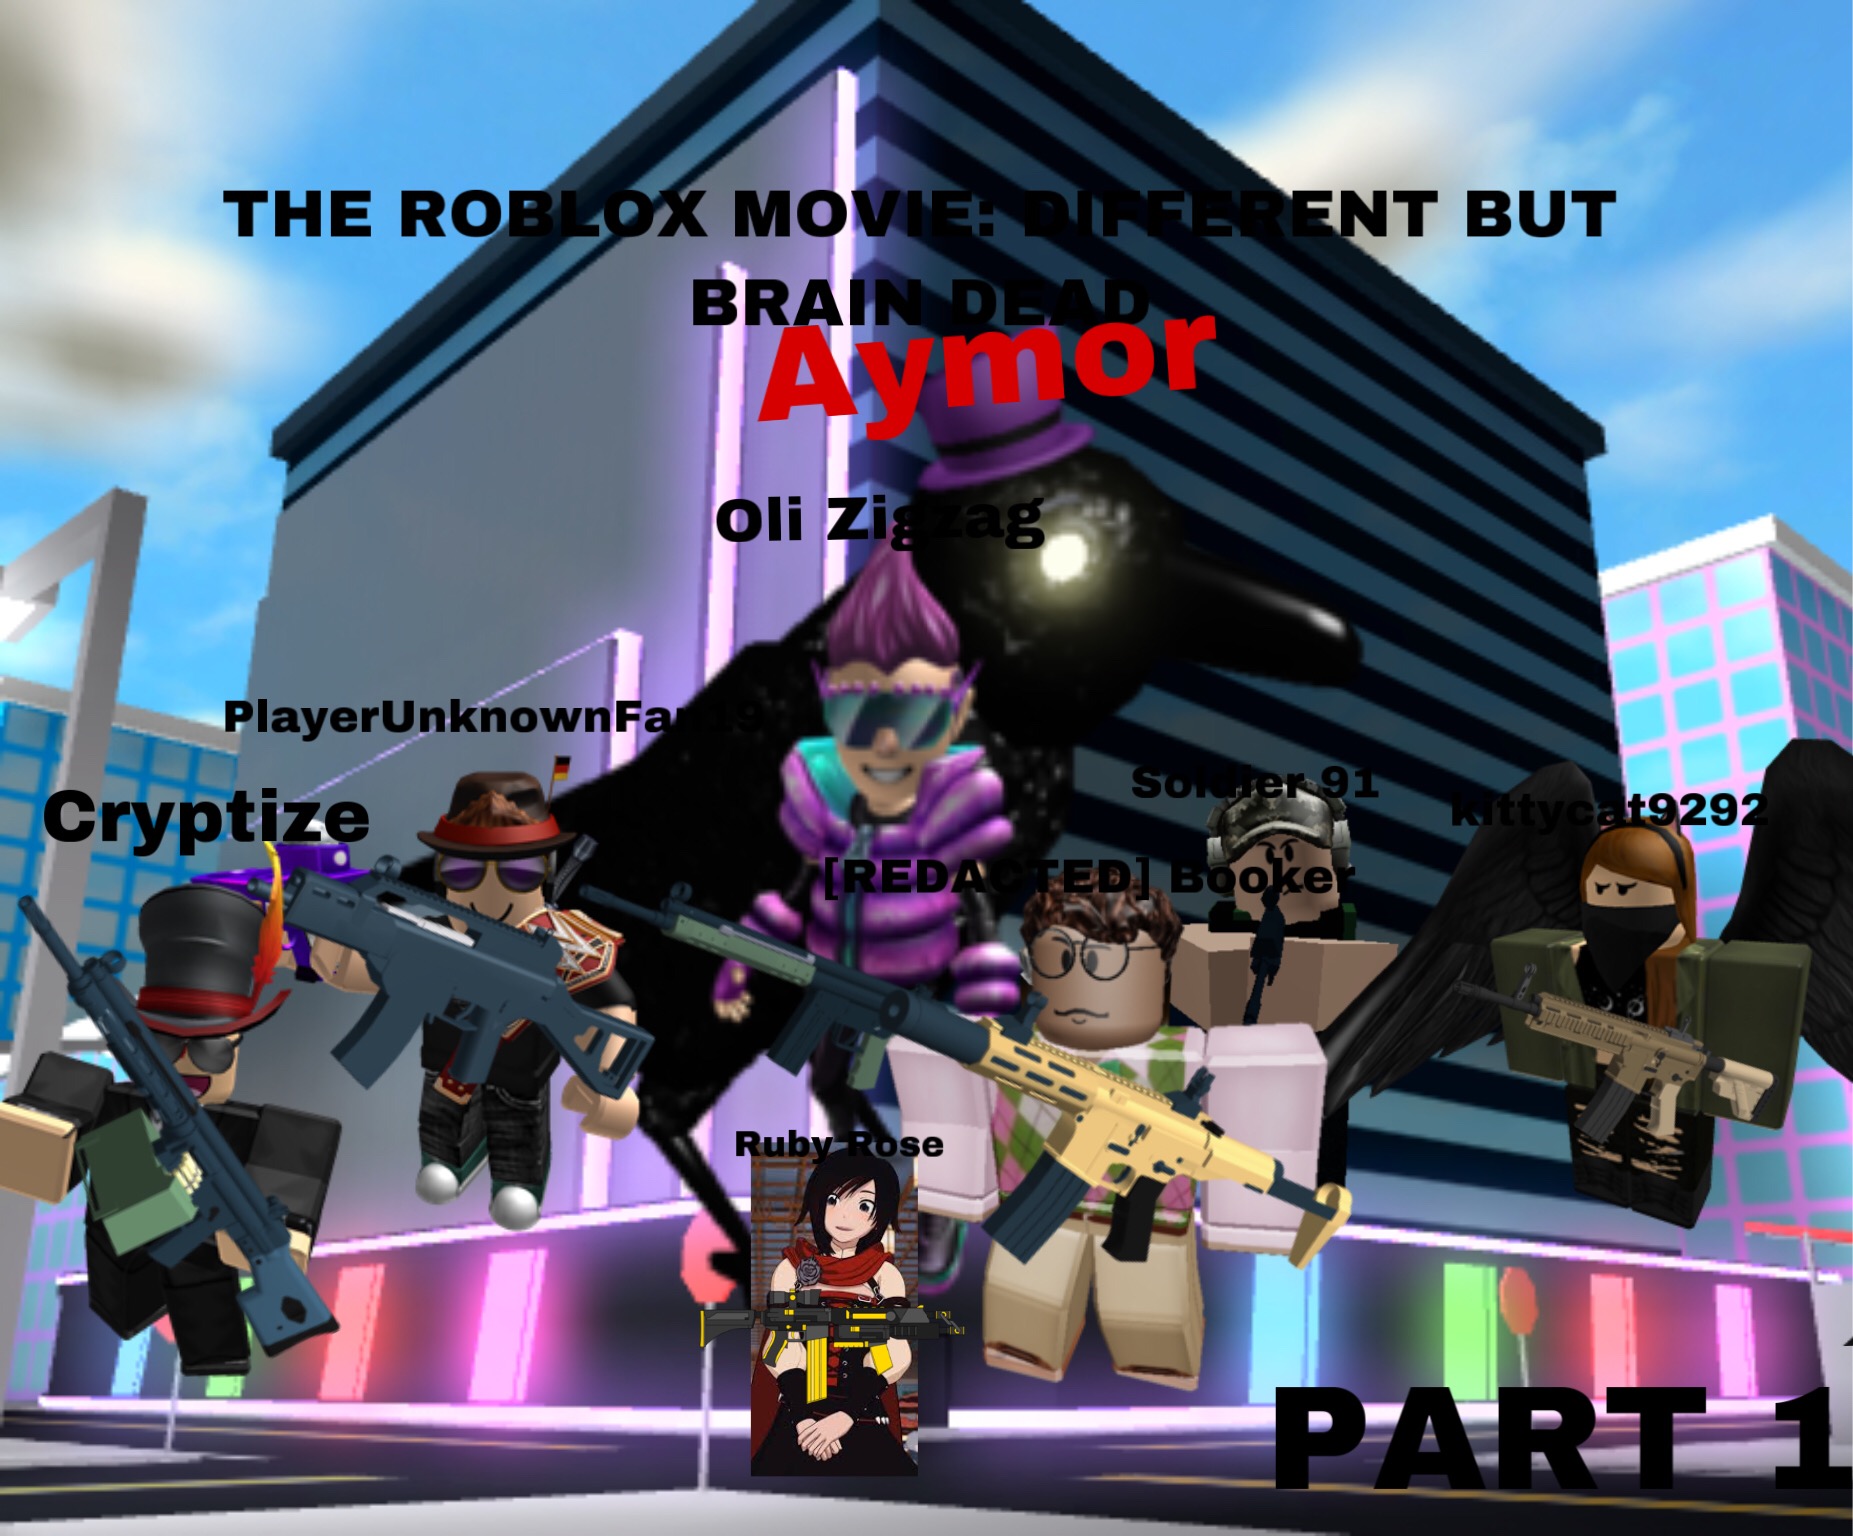 The Roblox Movie Different But Brain Dead The Roblox - game not appearing in roblox